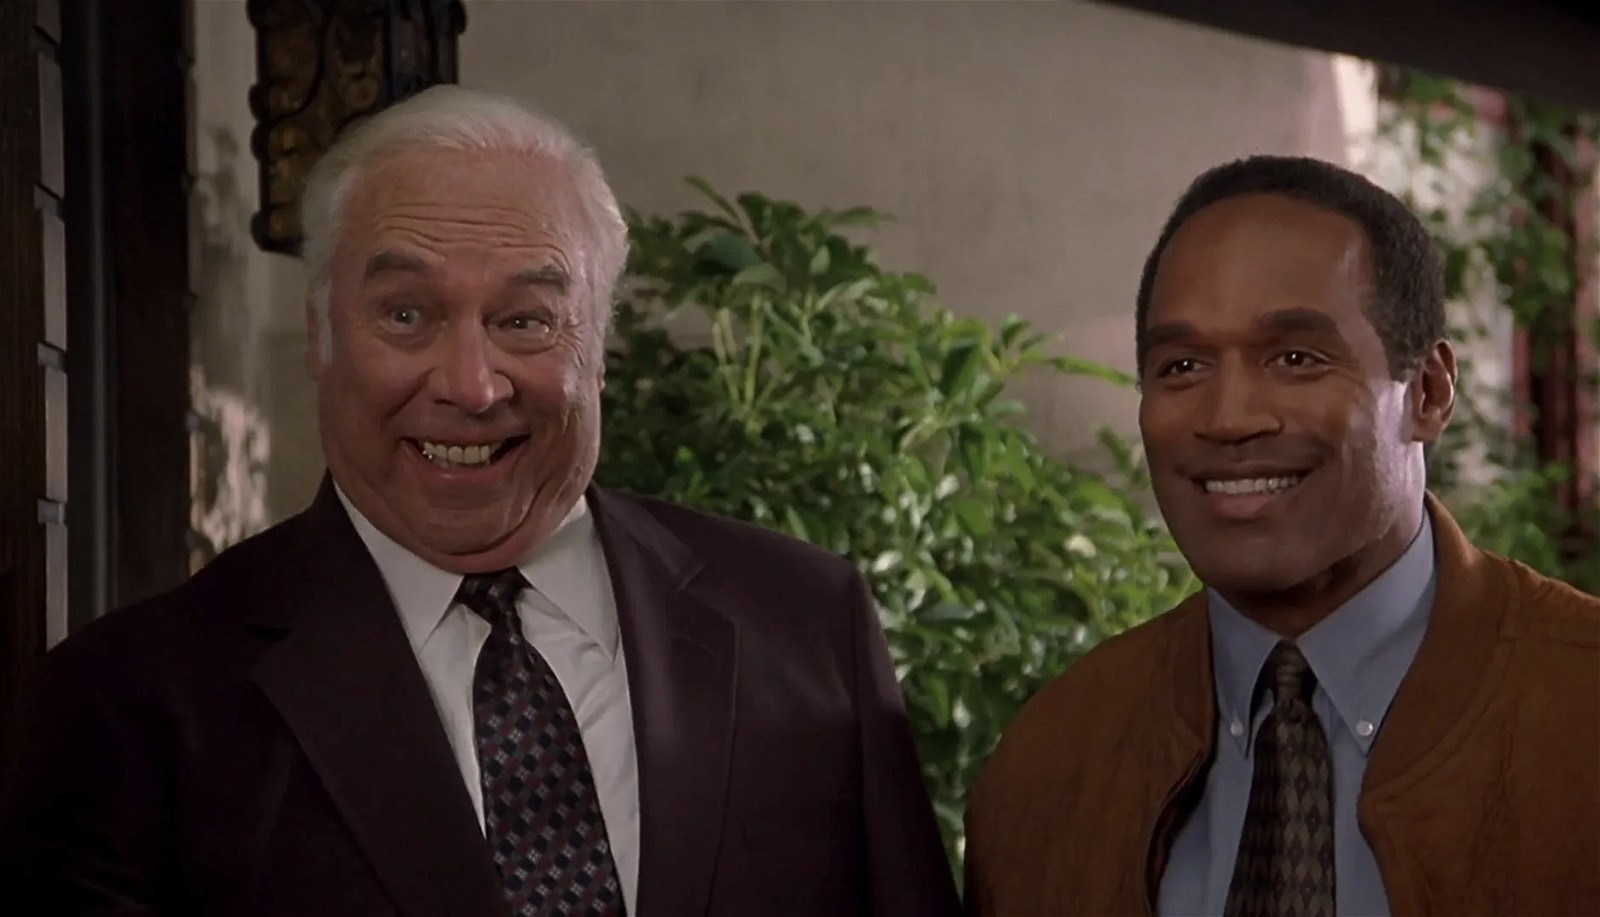 O.J. Simpson (right) in a still from Naked Gun 33 1/3: The Final Insult (1994)